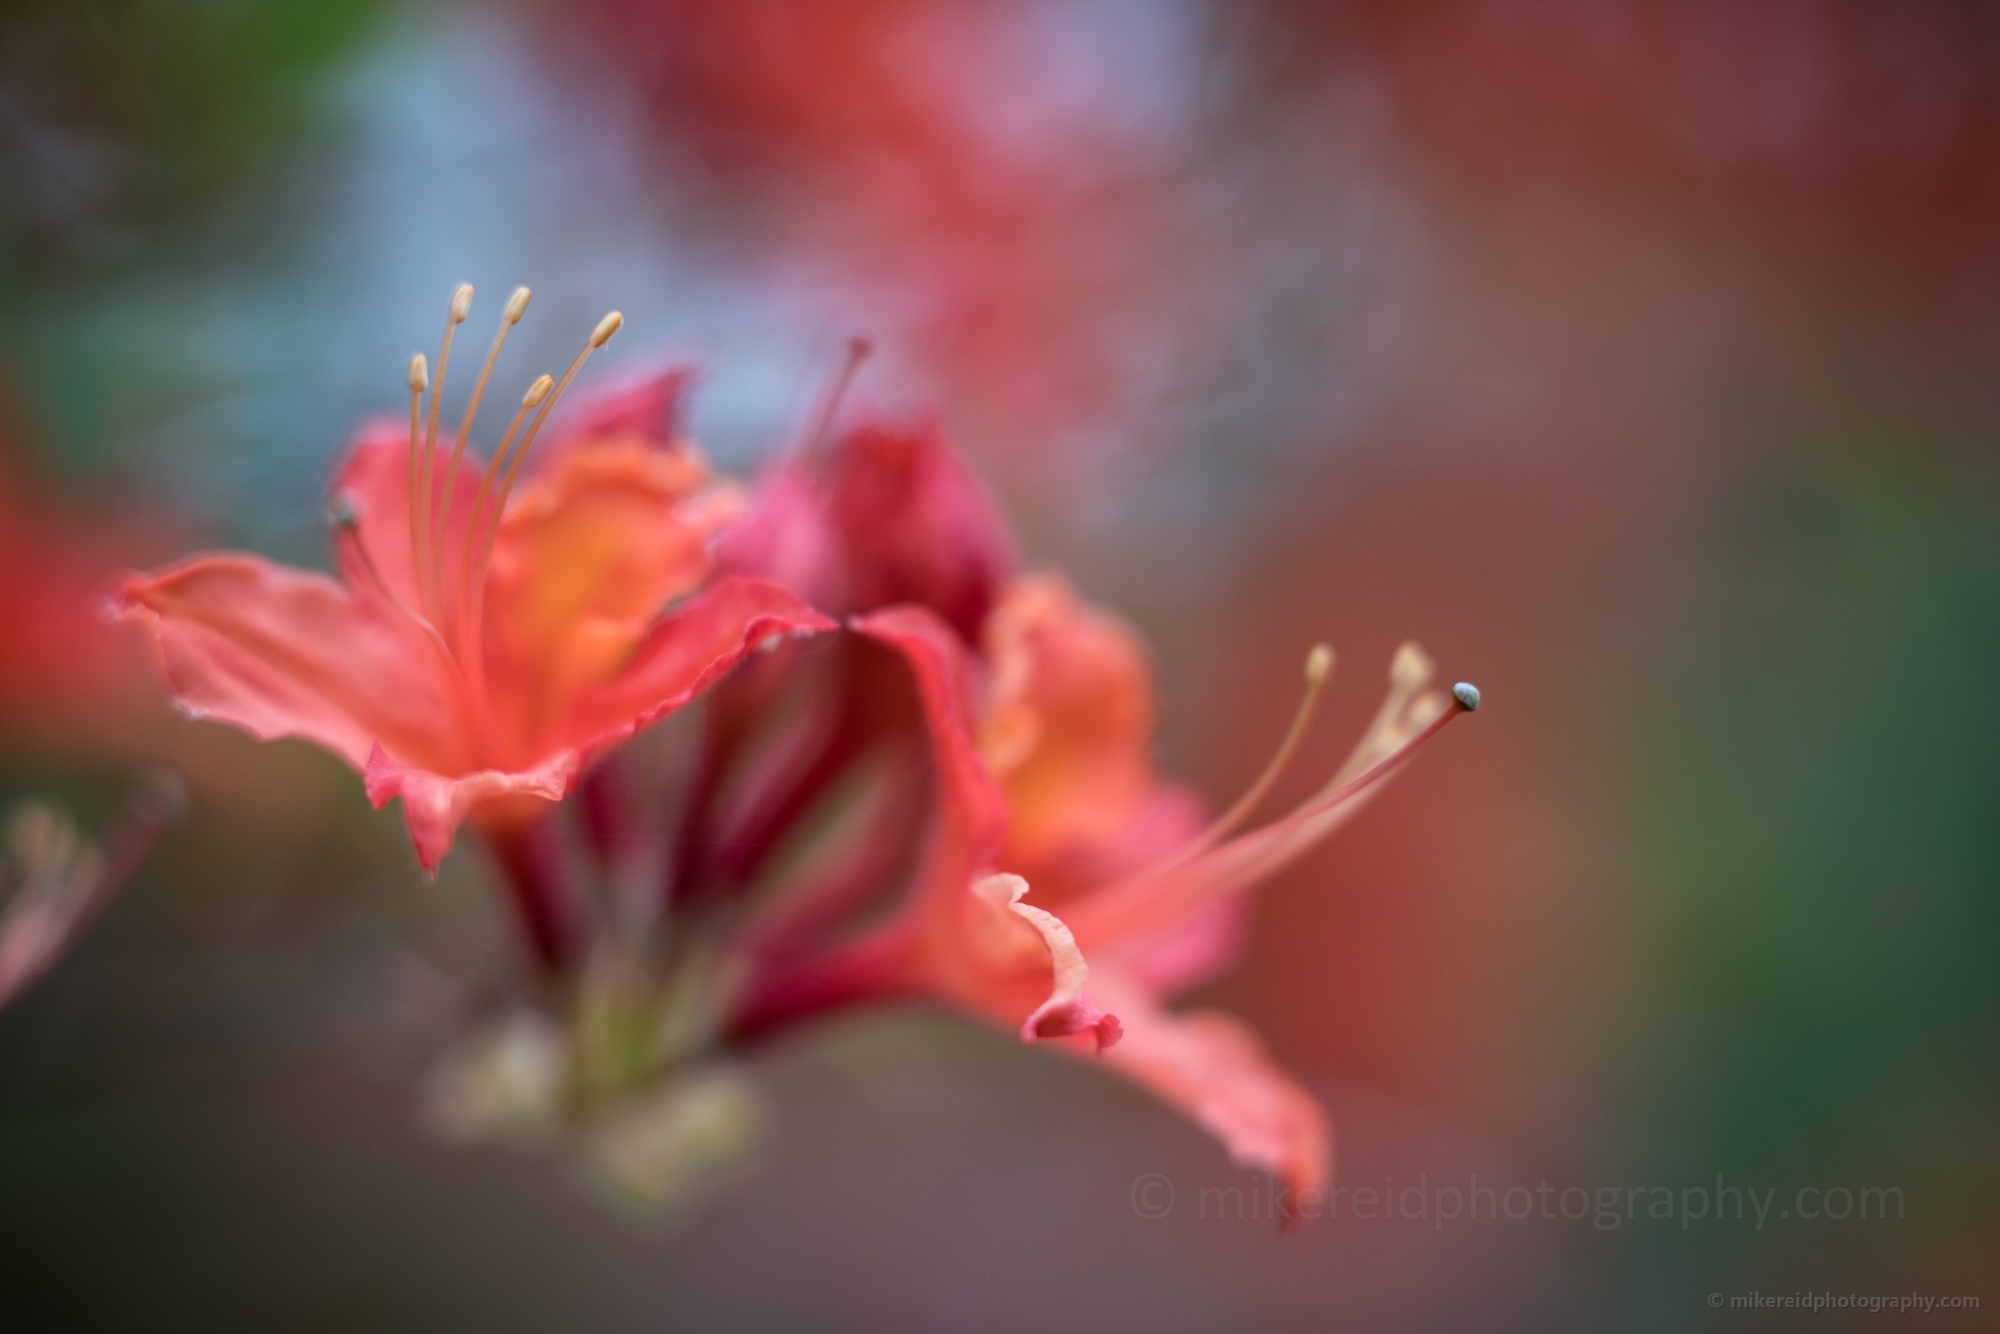 Rhododendron and Azaleas Photography Two Blooms Closeup.jpg 